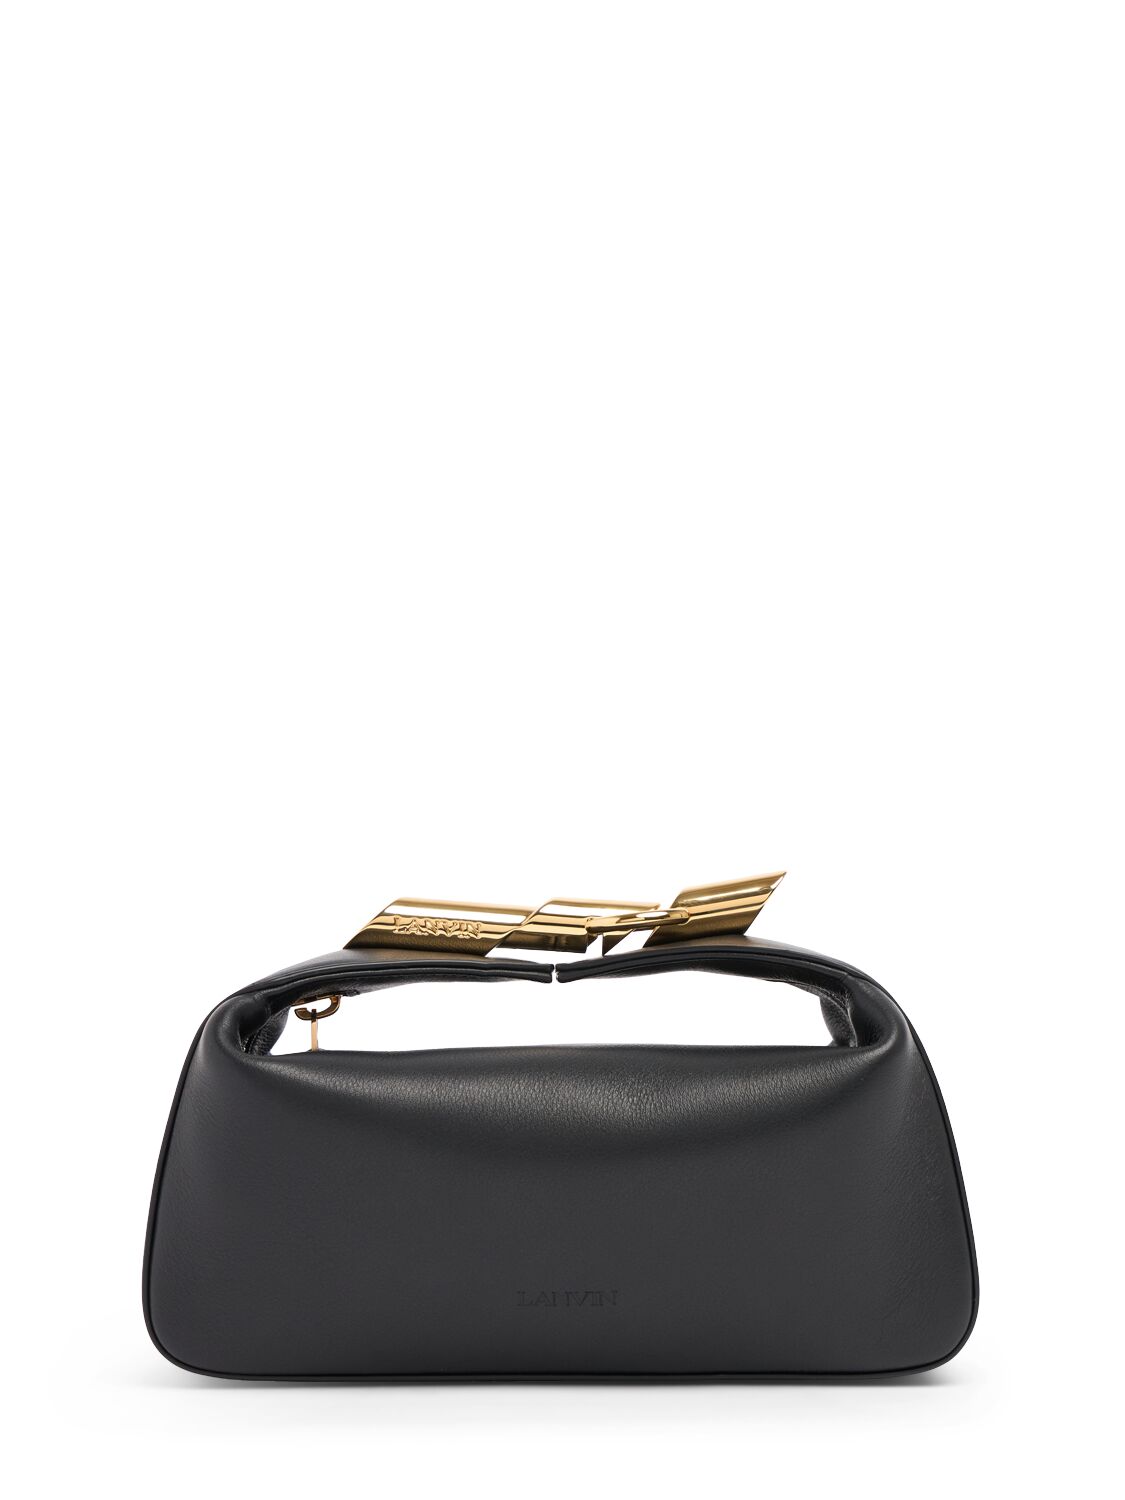 Lanvin Haute Sequence Leather Clutch In Black